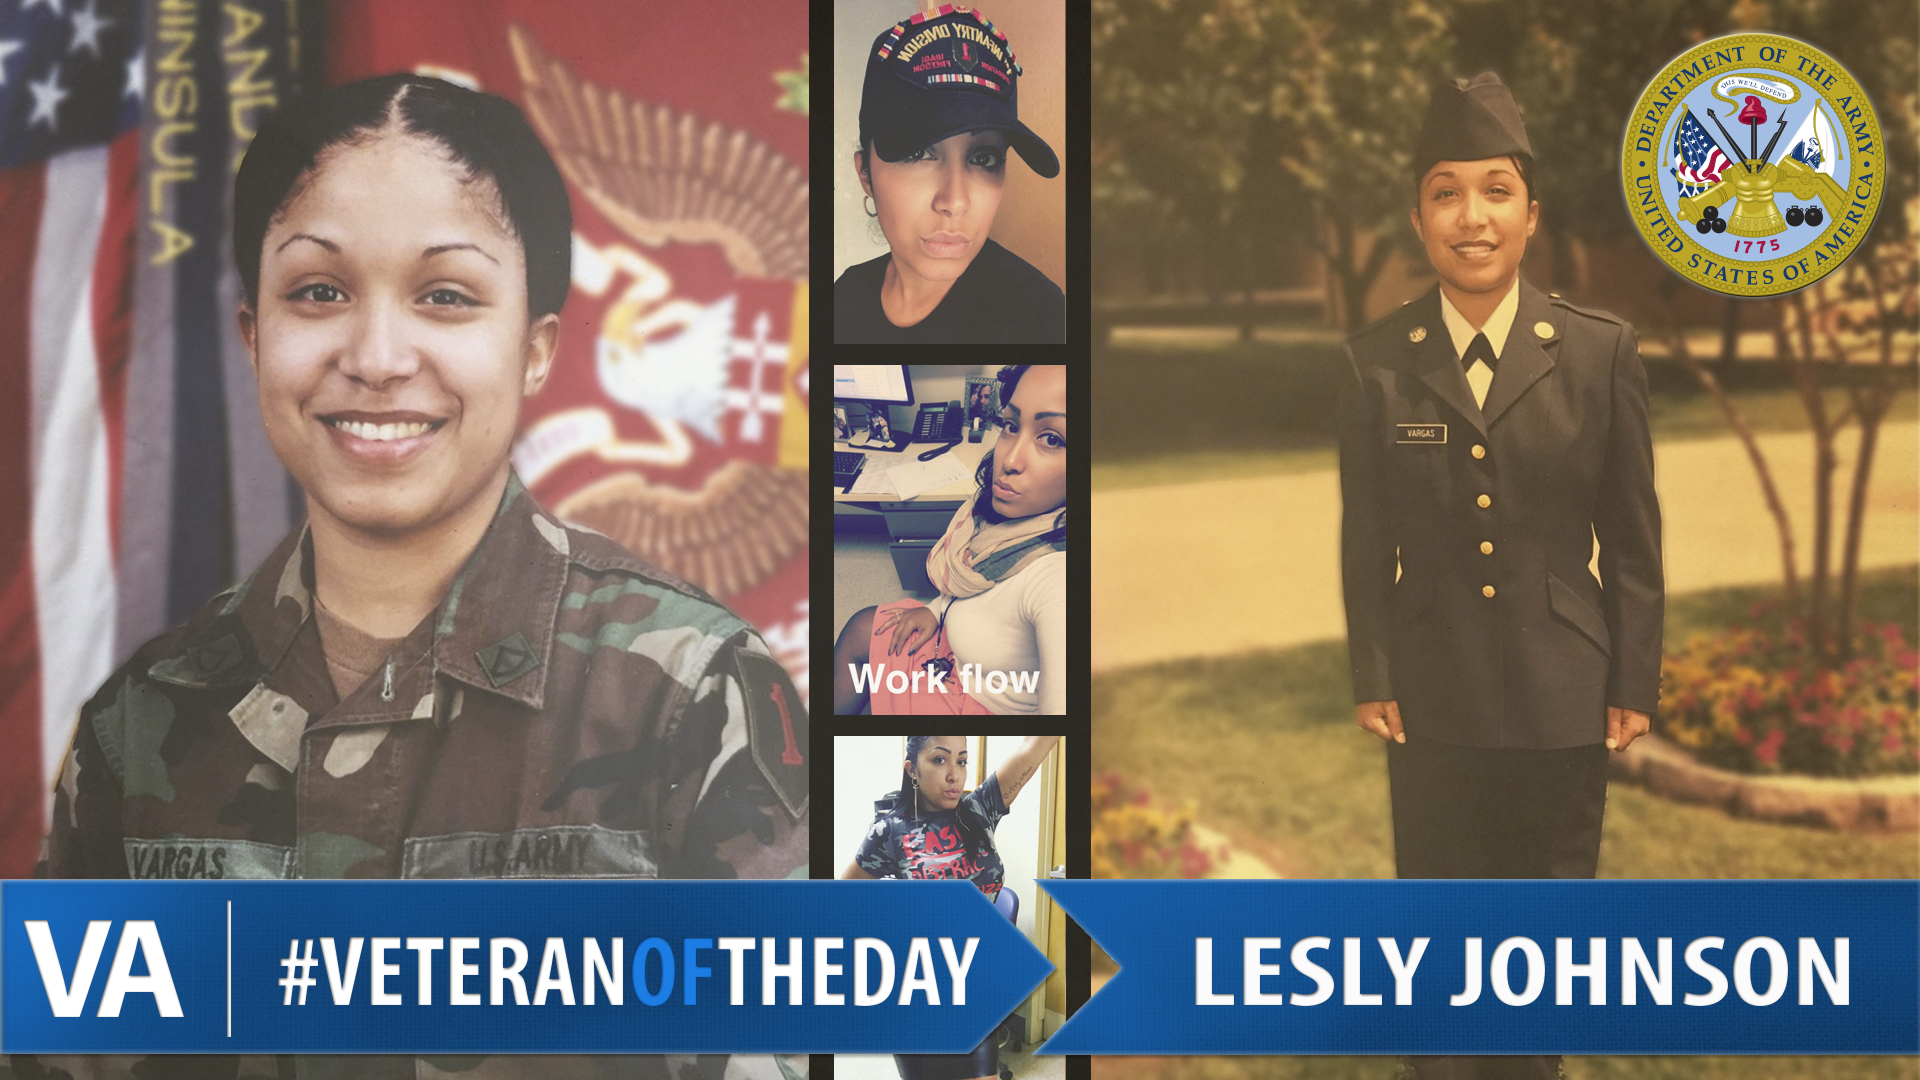 Lesly Johnson - Veteran of the Day